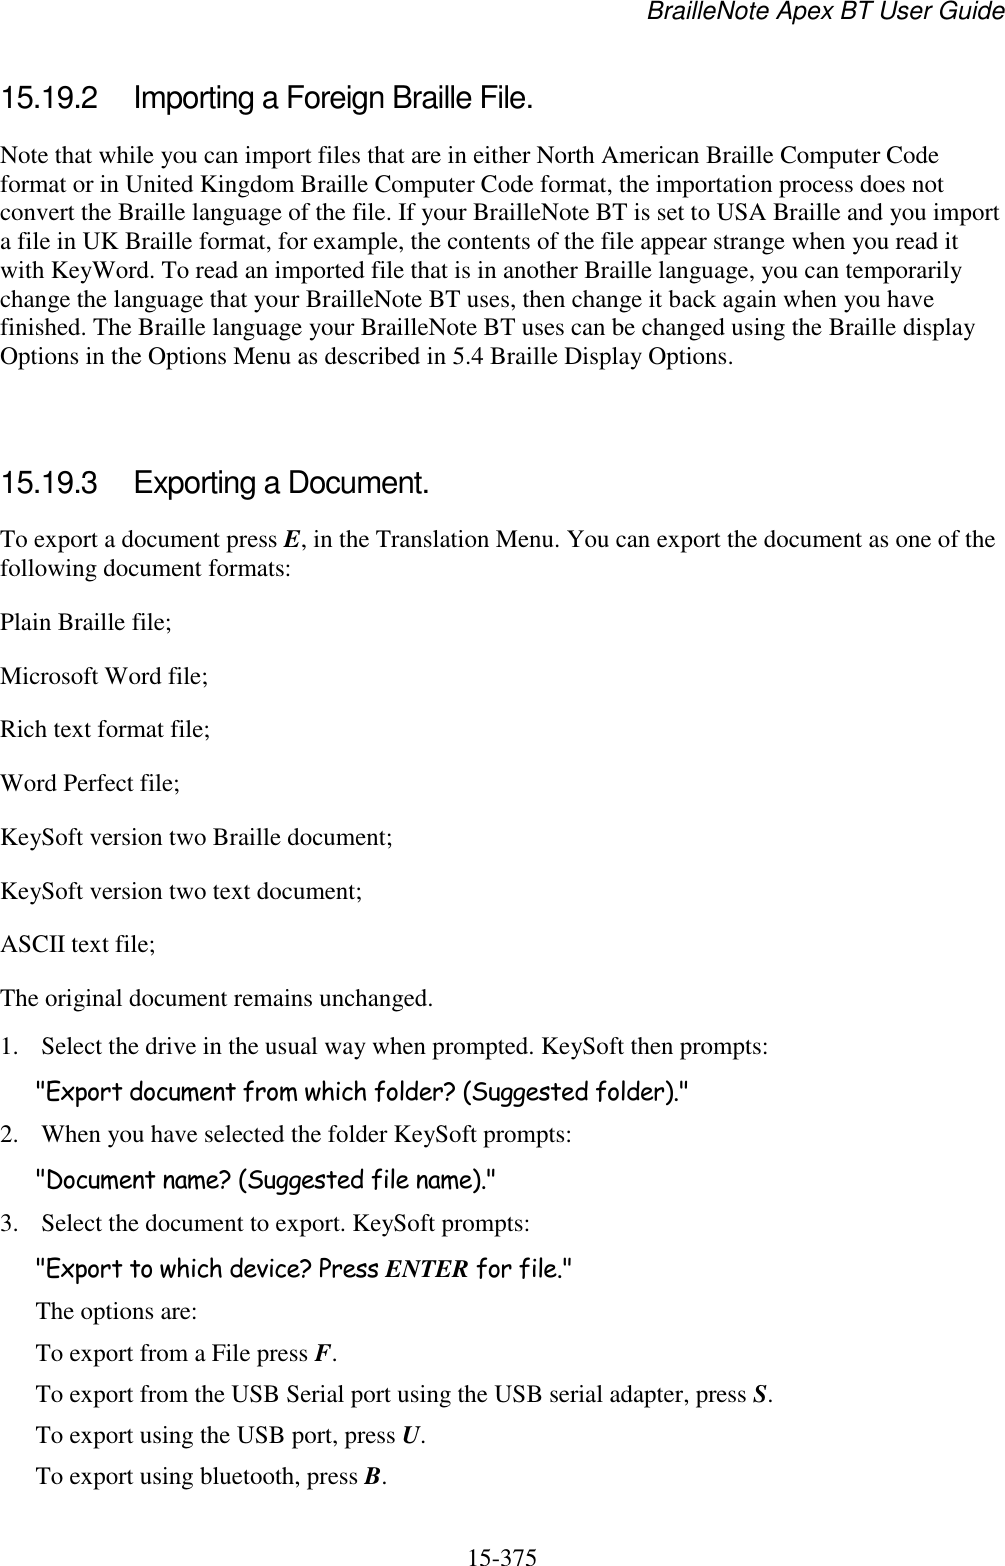 BrailleNote Apex BT User Guide   15-375   15.19.2  Importing a Foreign Braille File. Note that while you can import files that are in either North American Braille Computer Code format or in United Kingdom Braille Computer Code format, the importation process does not convert the Braille language of the file. If your BrailleNote BT is set to USA Braille and you import a file in UK Braille format, for example, the contents of the file appear strange when you read it with KeyWord. To read an imported file that is in another Braille language, you can temporarily change the language that your BrailleNote BT uses, then change it back again when you have finished. The Braille language your BrailleNote BT uses can be changed using the Braille display Options in the Options Menu as described in 5.4 Braille Display Options.   15.19.3  Exporting a Document. To export a document press E, in the Translation Menu. You can export the document as one of the following document formats: Plain Braille file; Microsoft Word file; Rich text format file; Word Perfect file; KeySoft version two Braille document; KeySoft version two text document; ASCII text file; The original document remains unchanged. 1. Select the drive in the usual way when prompted. KeySoft then prompts: &quot;Export document from which folder? (Suggested folder).&quot; 2. When you have selected the folder KeySoft prompts: &quot;Document name? (Suggested file name).&quot; 3. Select the document to export. KeySoft prompts: &quot;Export to which device? Press ENTER for file.&quot; The options are: To export from a File press F. To export from the USB Serial port using the USB serial adapter, press S. To export using the USB port, press U. To export using bluetooth, press B.  